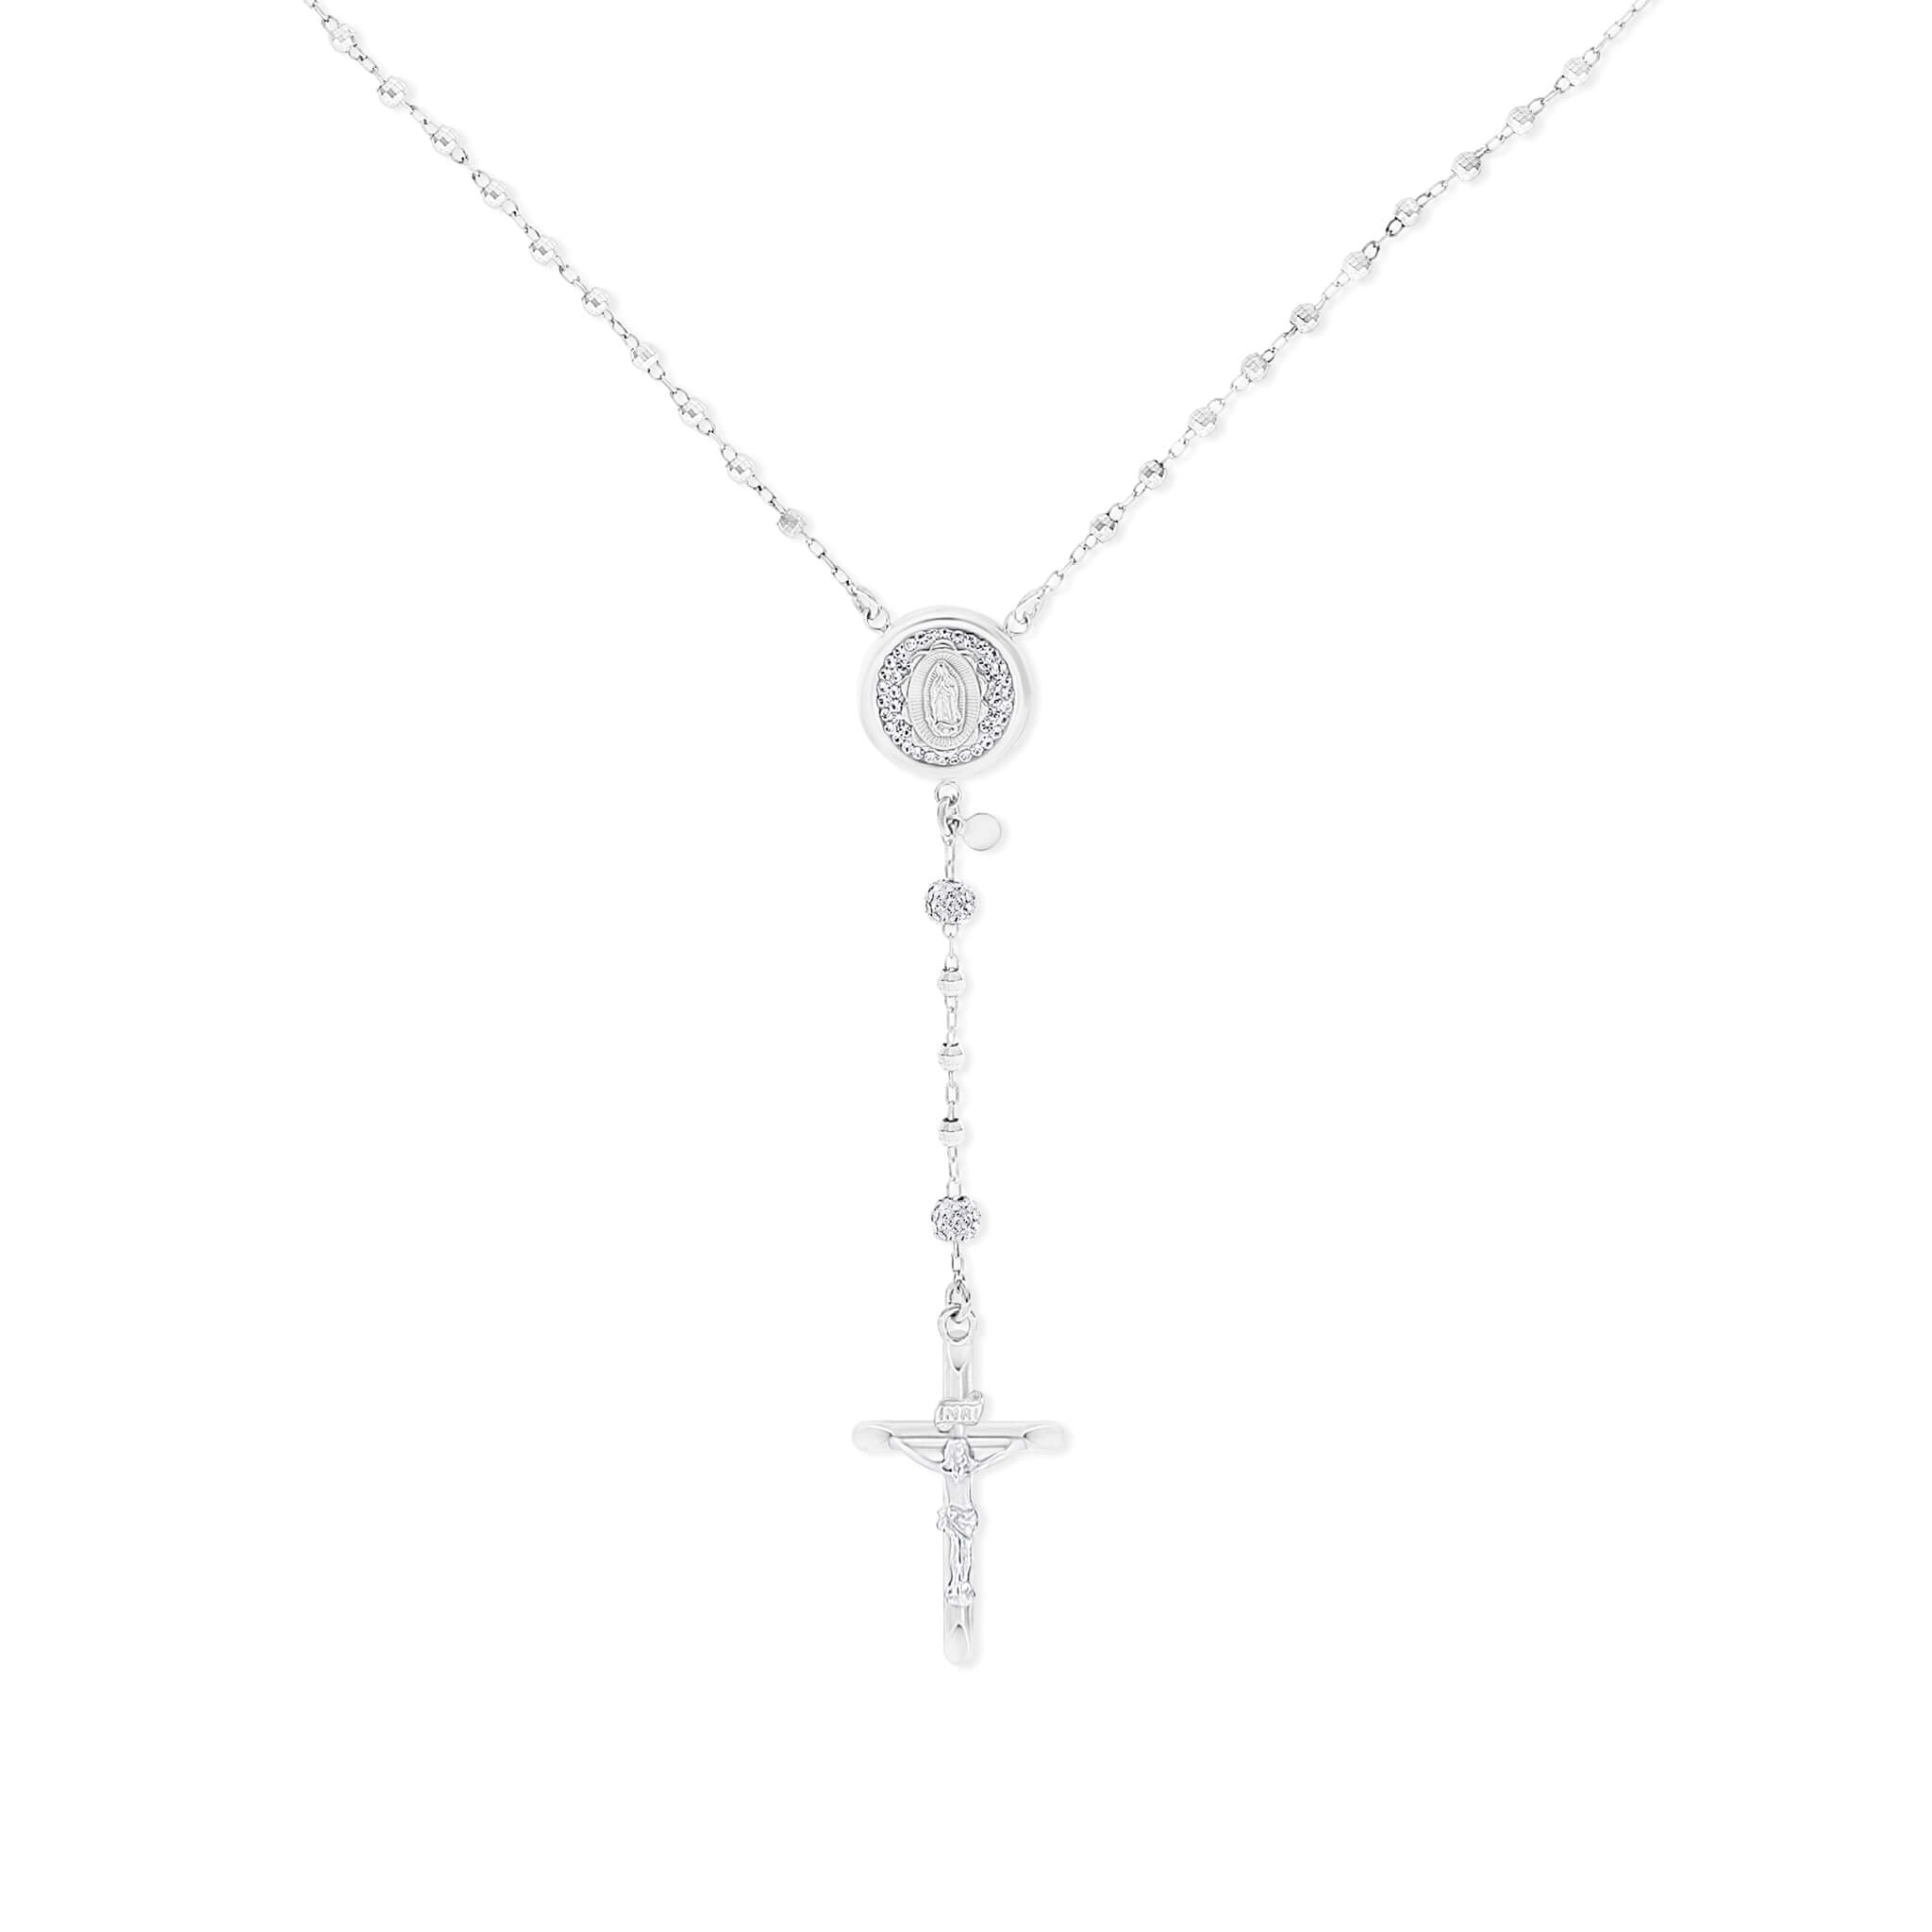 The Carmel Radiant Rosary Necklace - DressbarnNecklaces